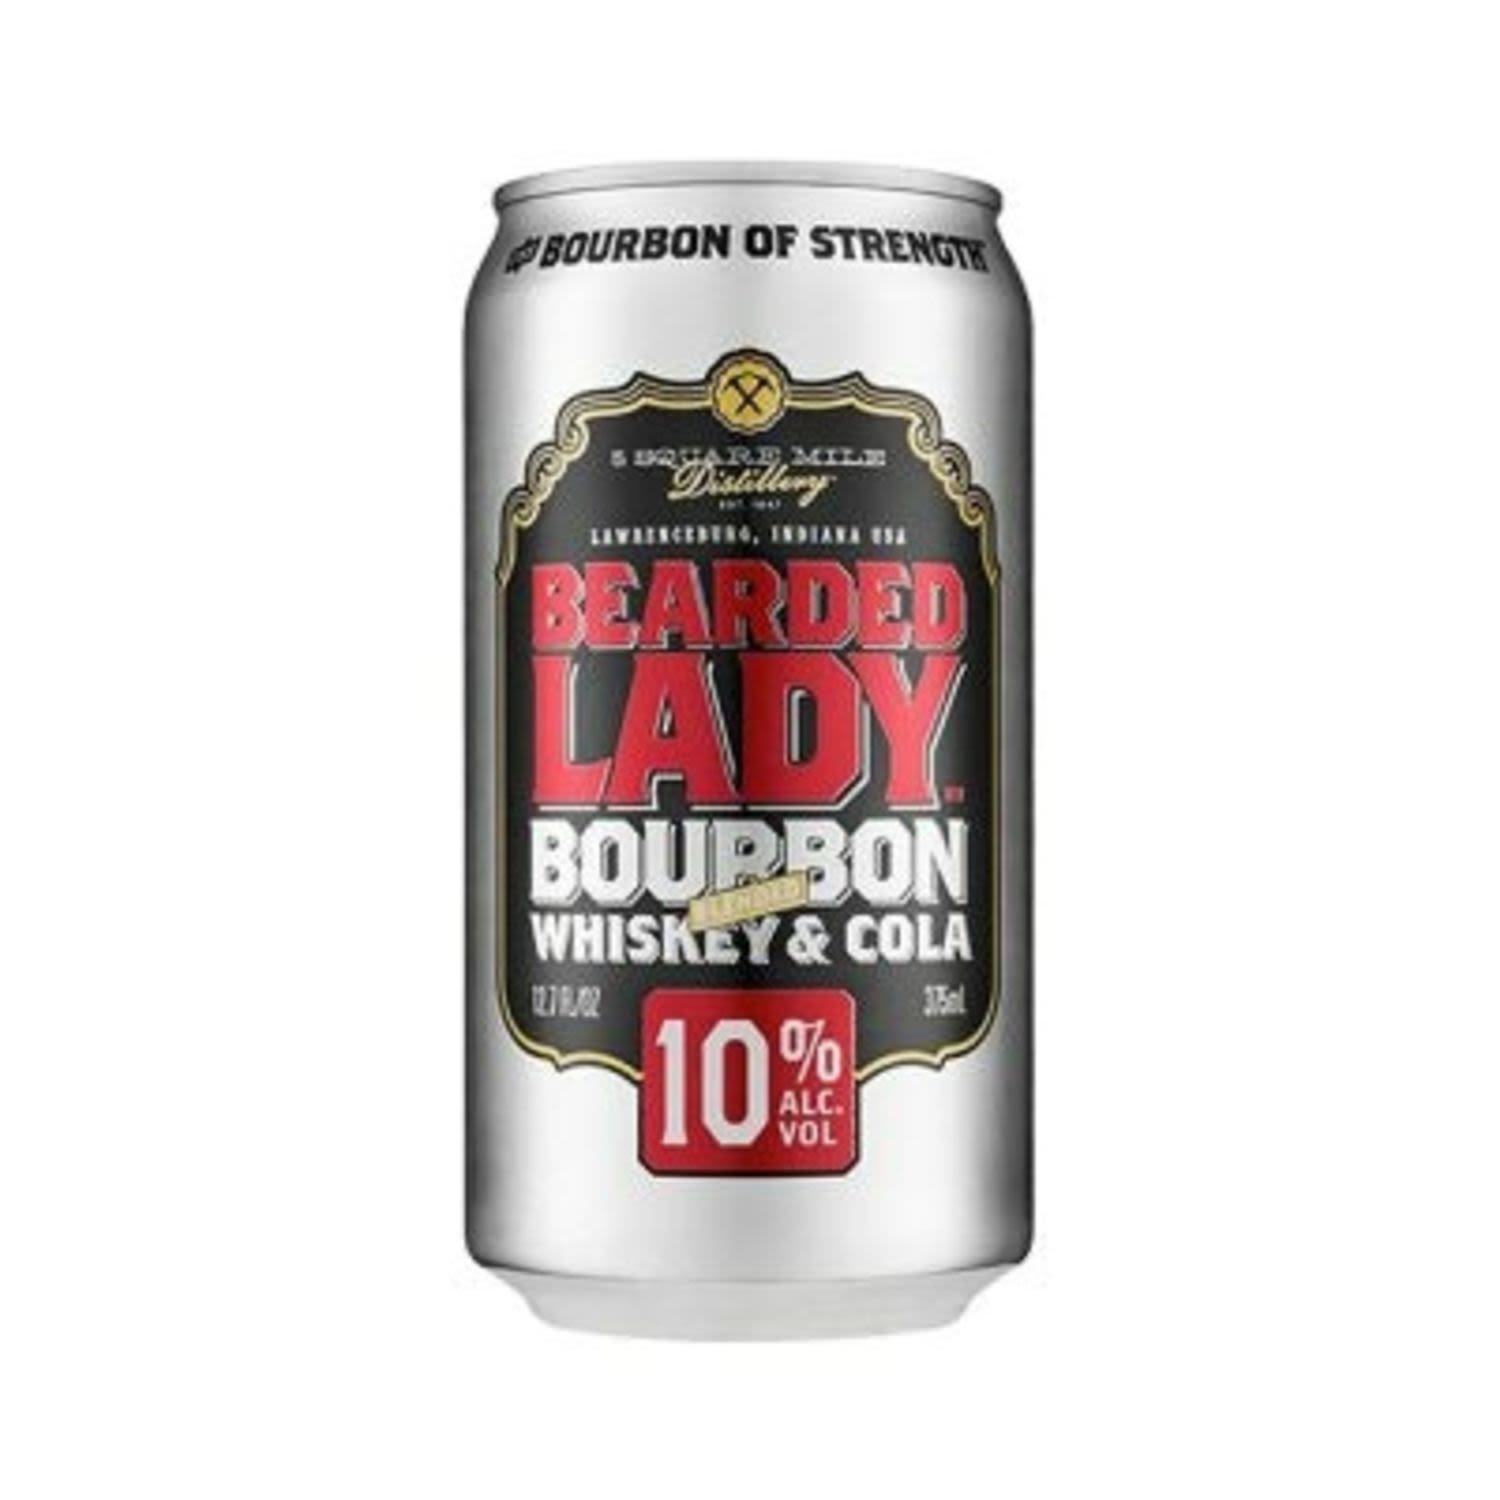 Bearded Lady Bourbon is made with a strength you can taste. It delivers a full bourbon vanilla oak flavour and a cola that doesnt overpower the bourbon sweetness.<br /> <br />Alcohol Volume: 10.00%<br /><br />Pack Format: 24 Pack<br /><br />Standard Drinks: 3<br /><br />Pack Type: Can<br />